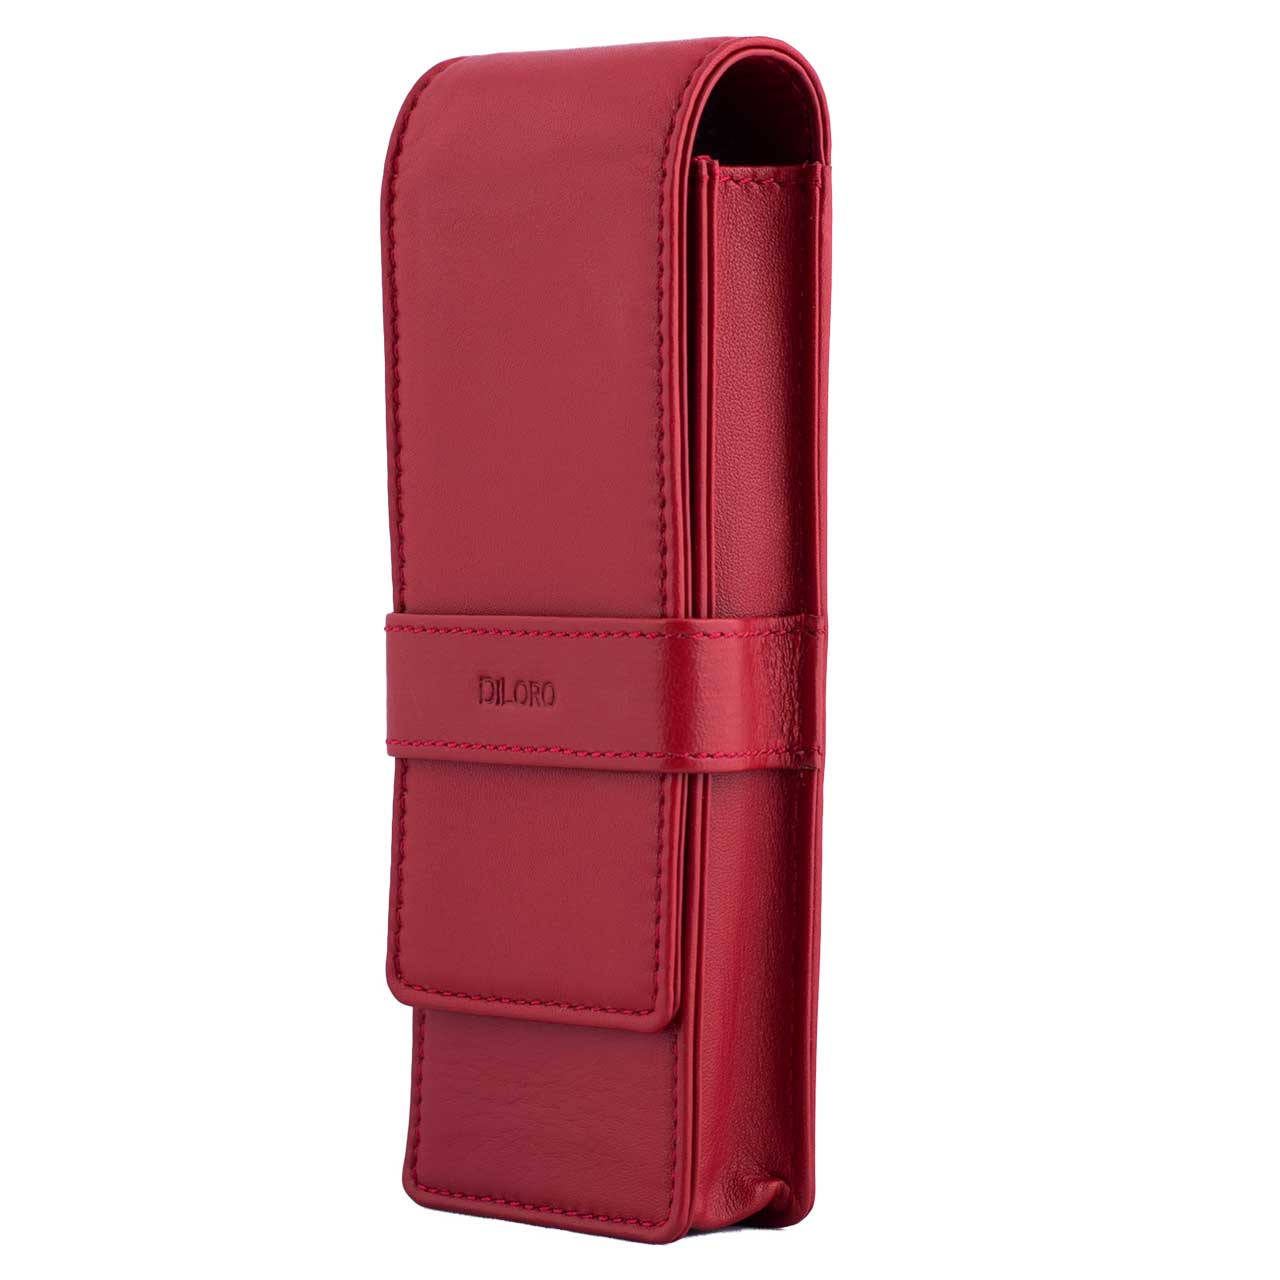 DiLoro Leather Triple Pen and Pencil Holder - Venetian Red Side 1